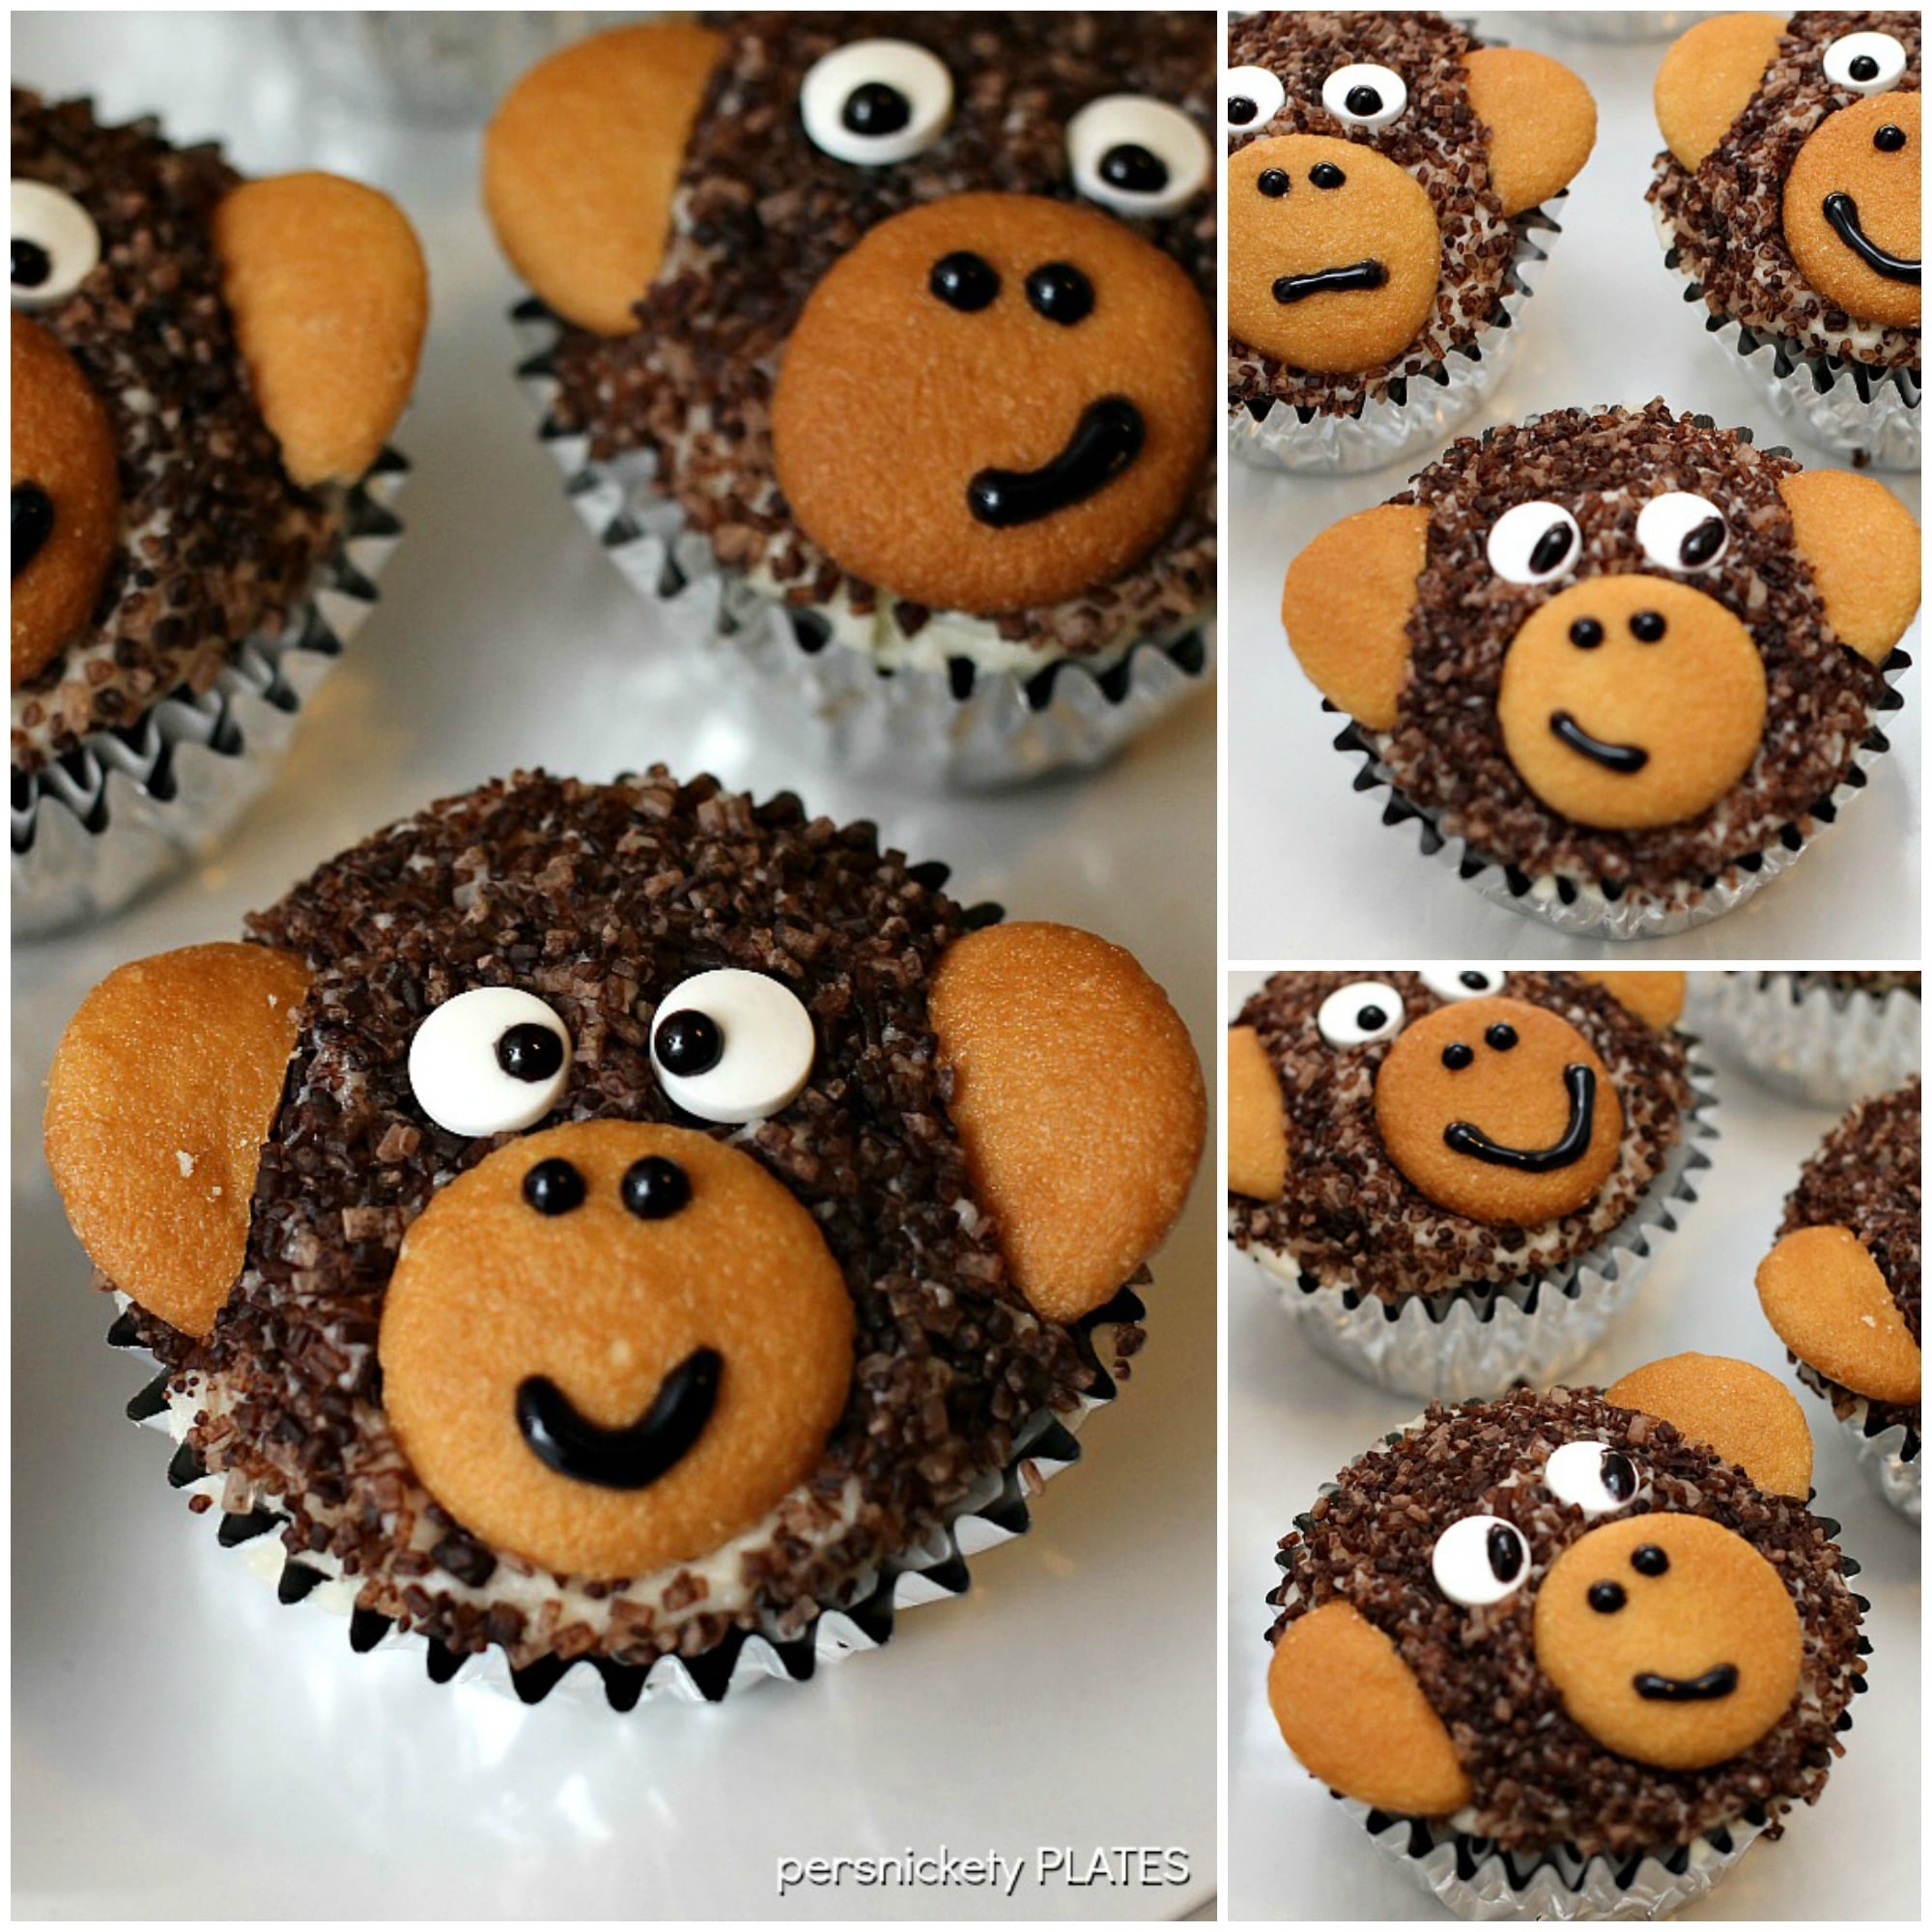 Adorable Monkey Cupcakes! Homemade chocolate cupcakes with chocolate sugar "fur" and vanilla wafer ears! Perfect for a monkey themed birthday party! | www.persnicketyplates.com